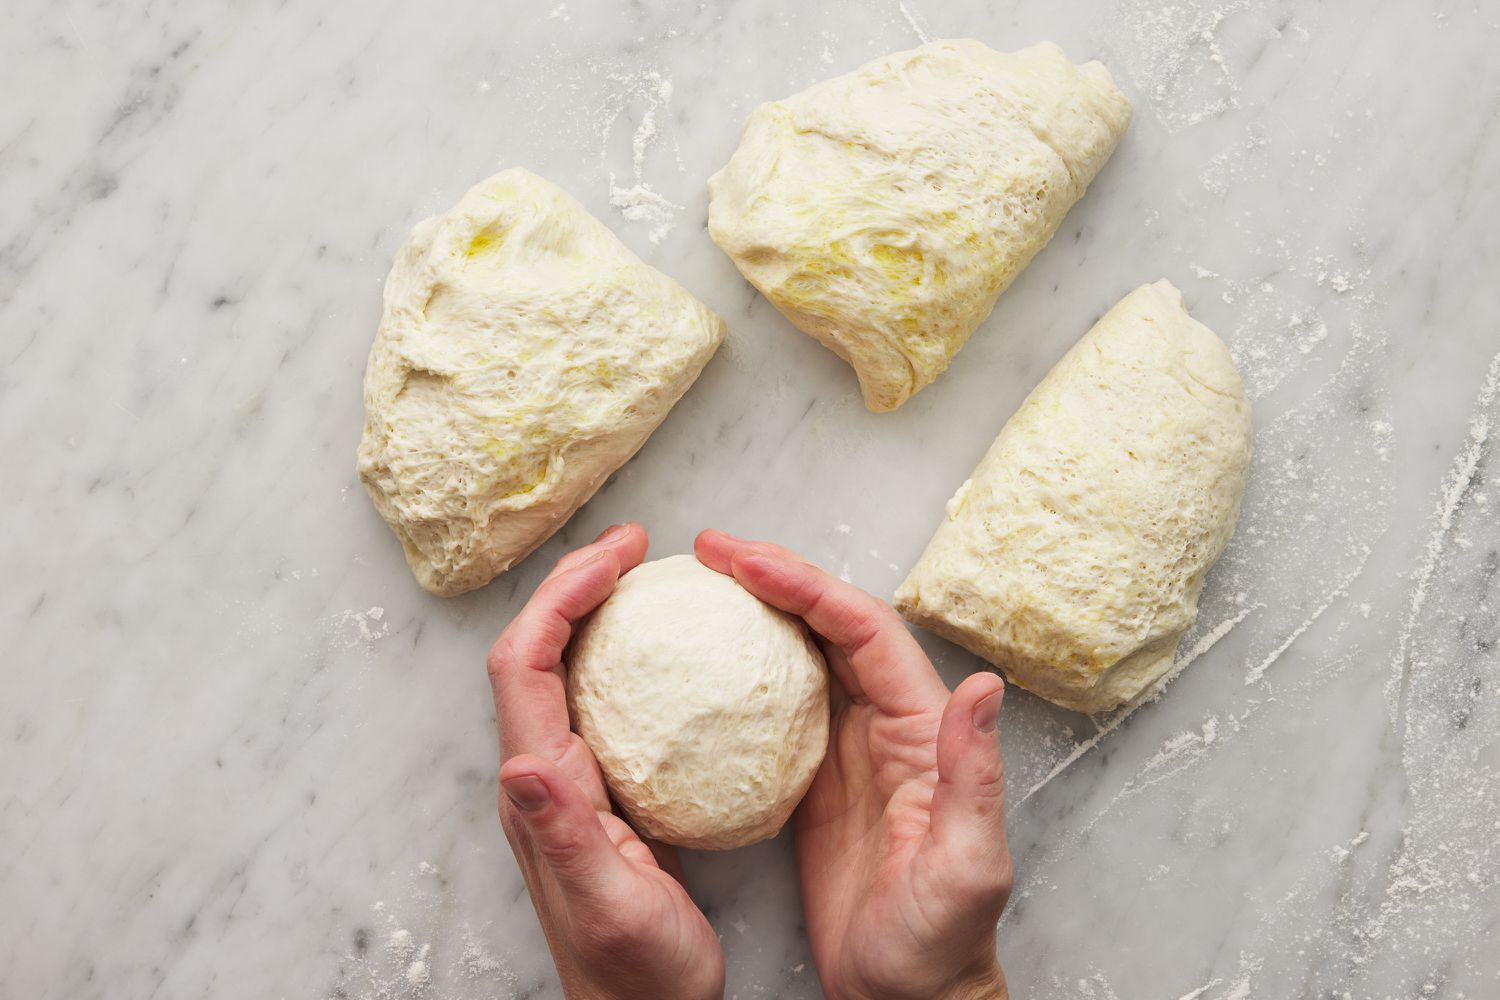 hands rolling a portion of calzone dough into a ball